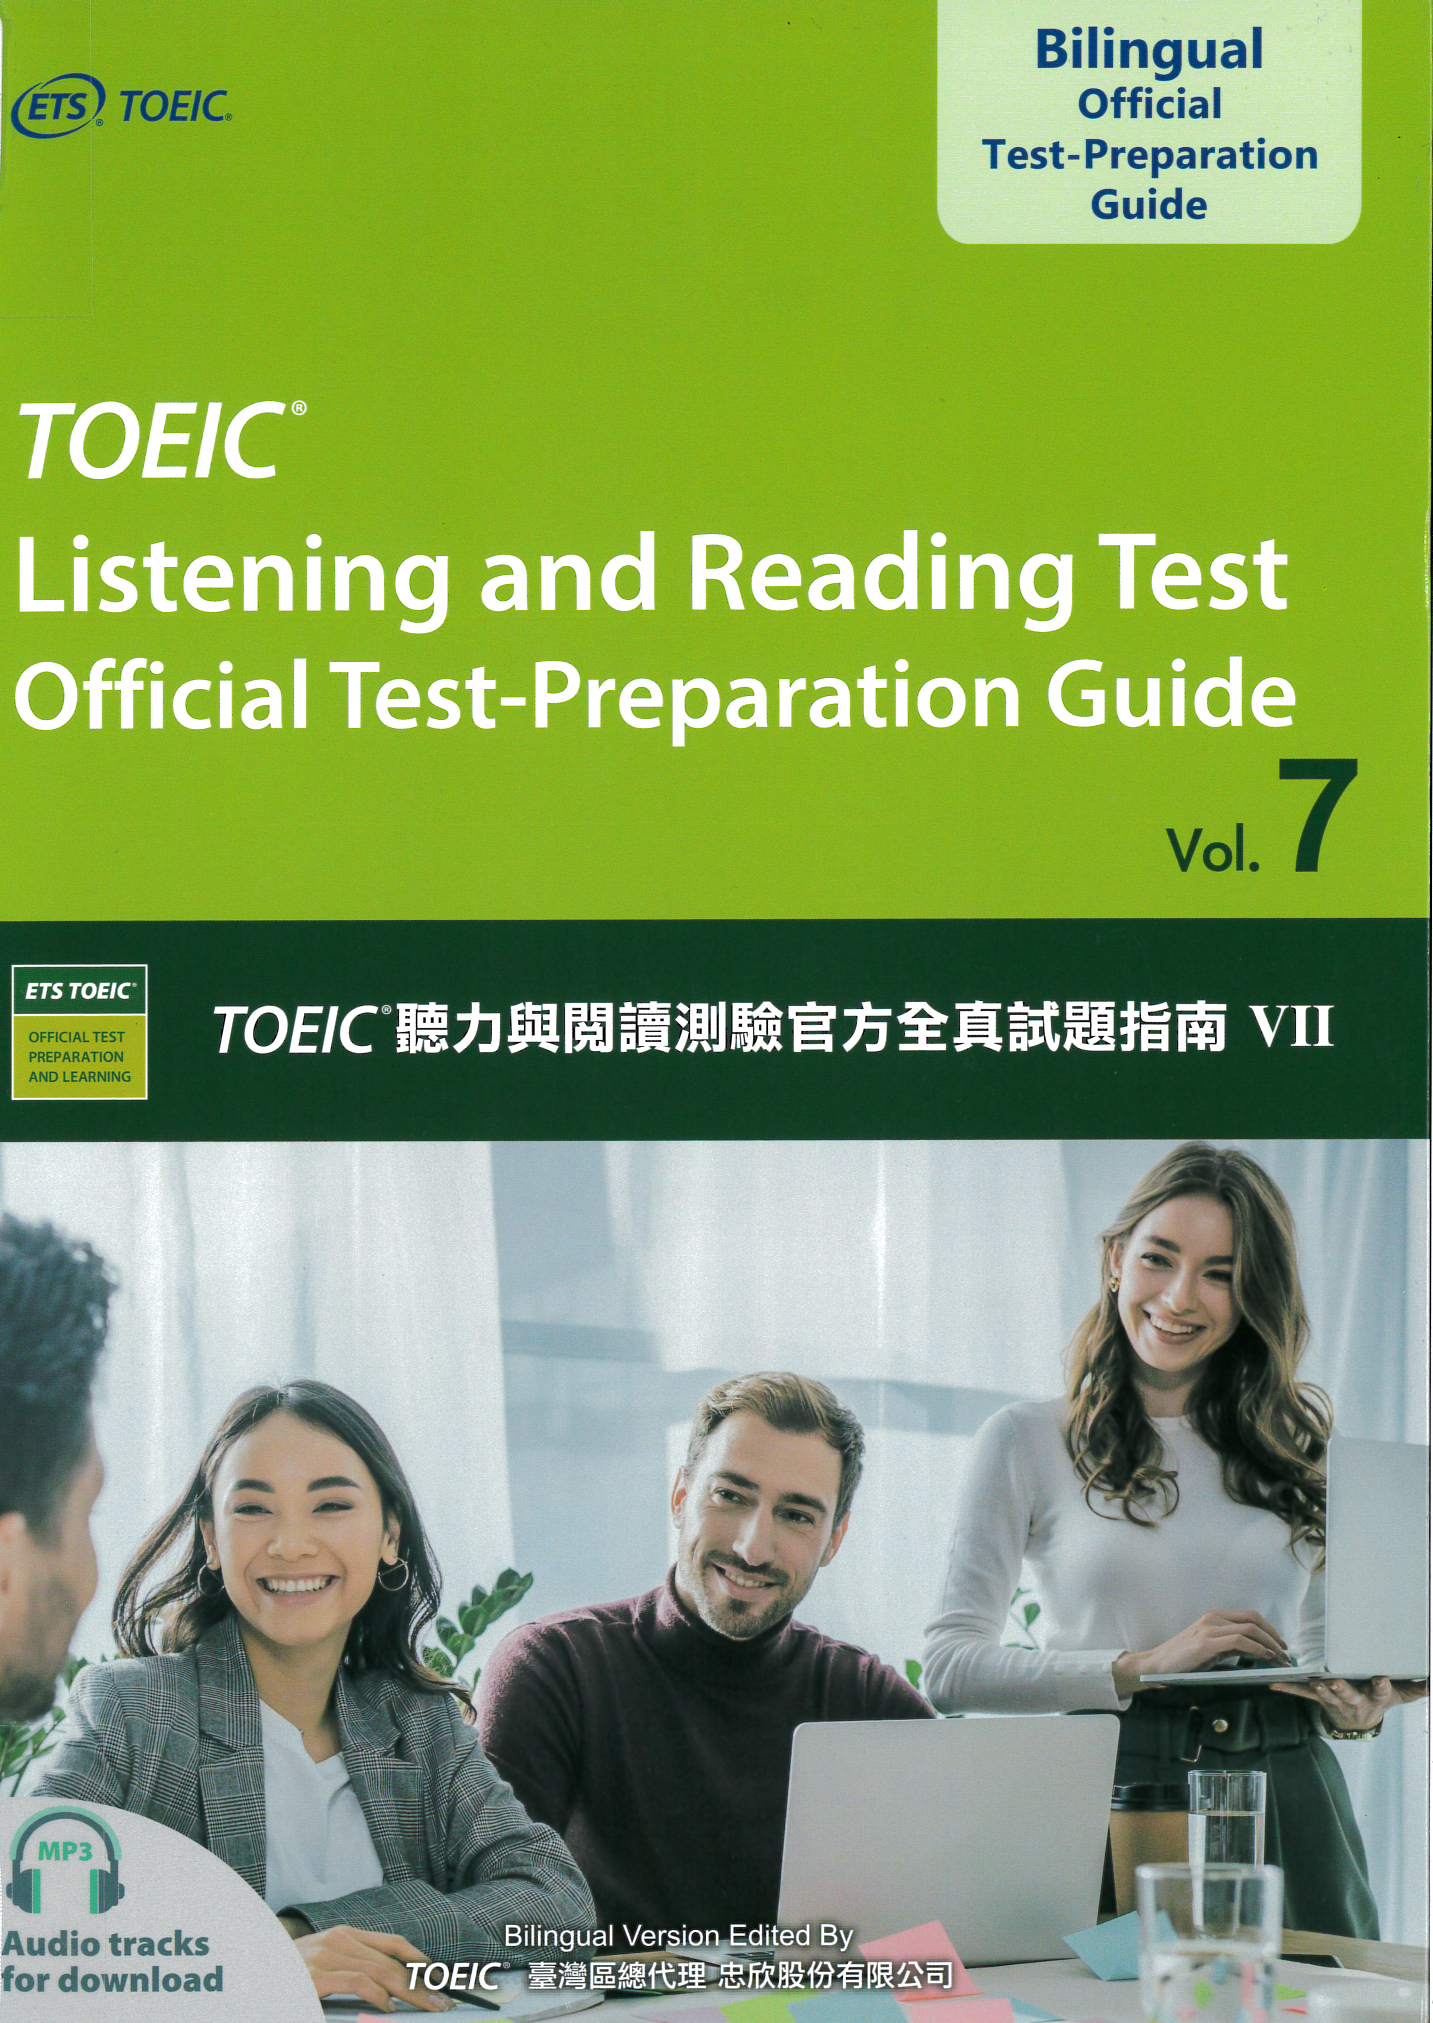 TOEIC聽力與閱讀測驗官方全真試題指南(VII) = TOEIC listening and reading test official test-preparation guide vol. 7